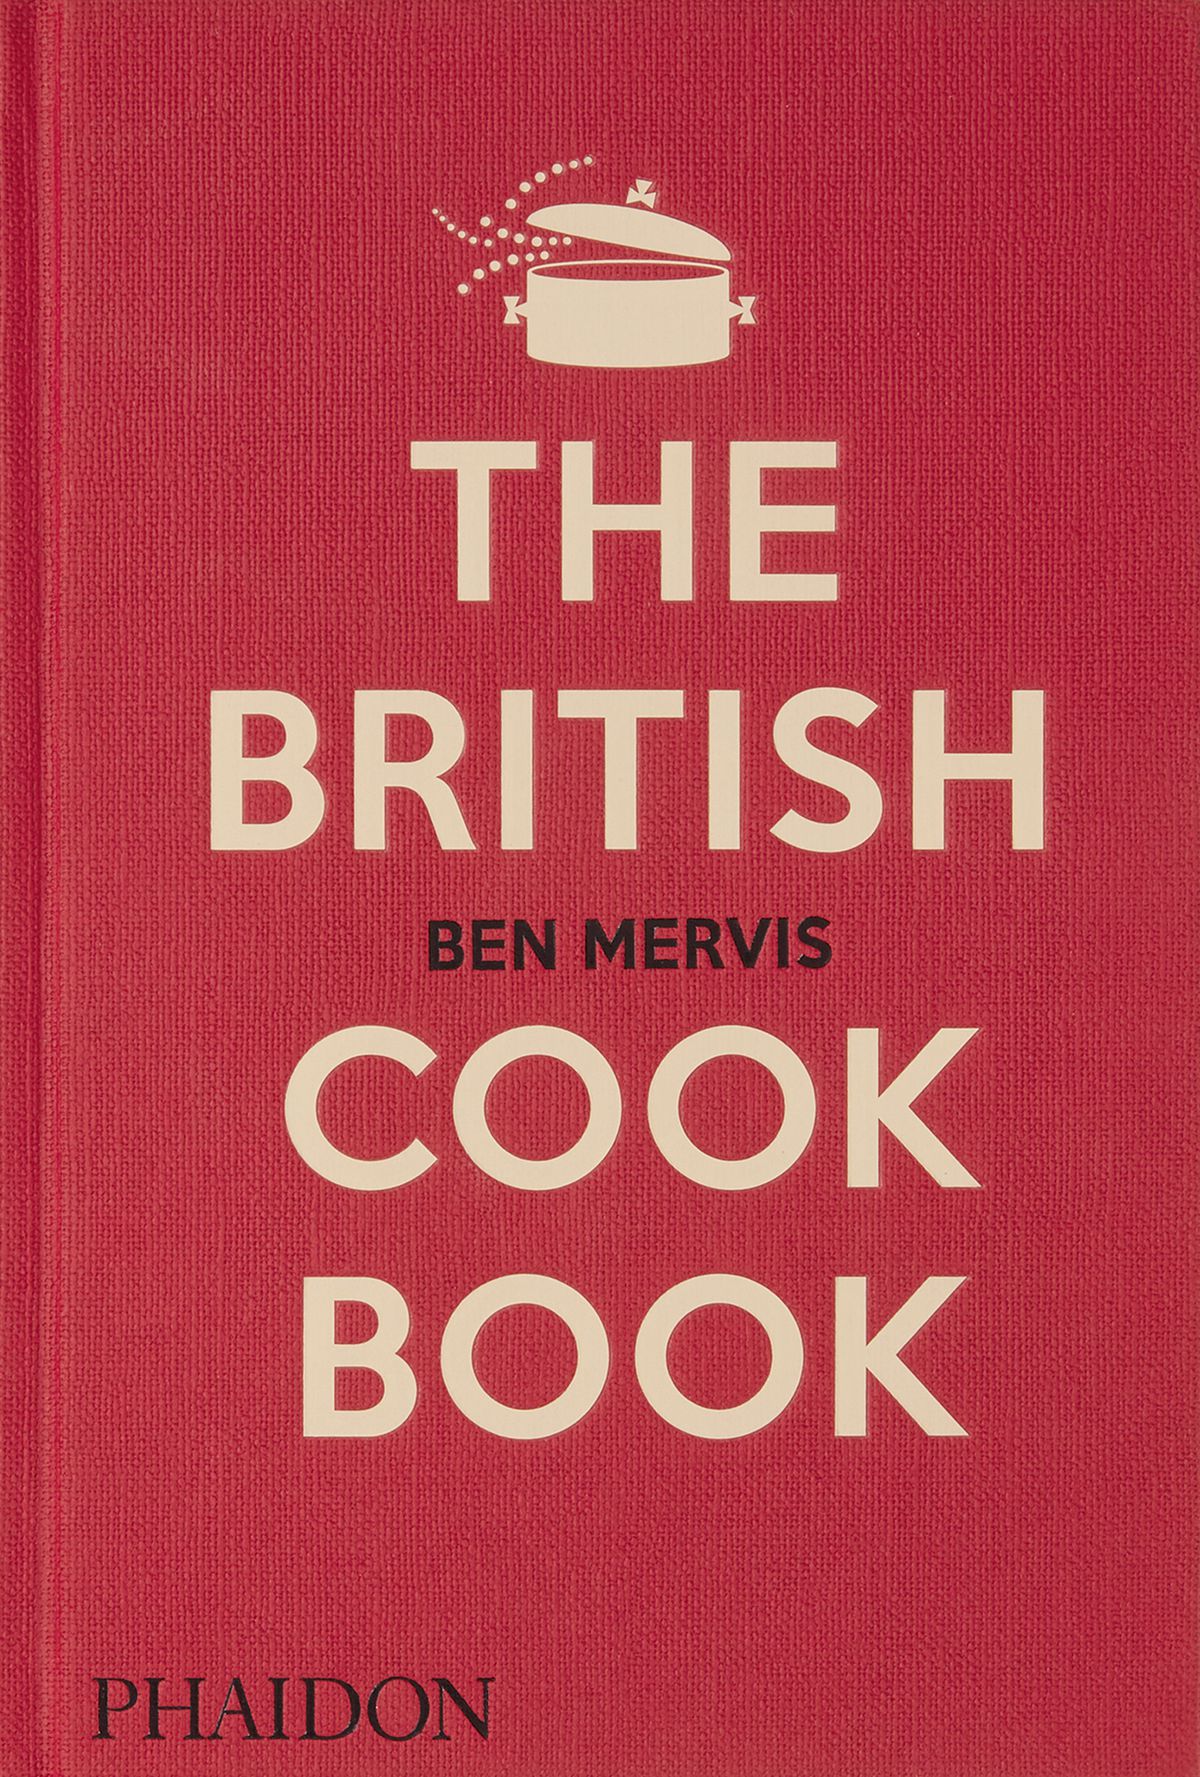 The cover of “The British Cookbook”